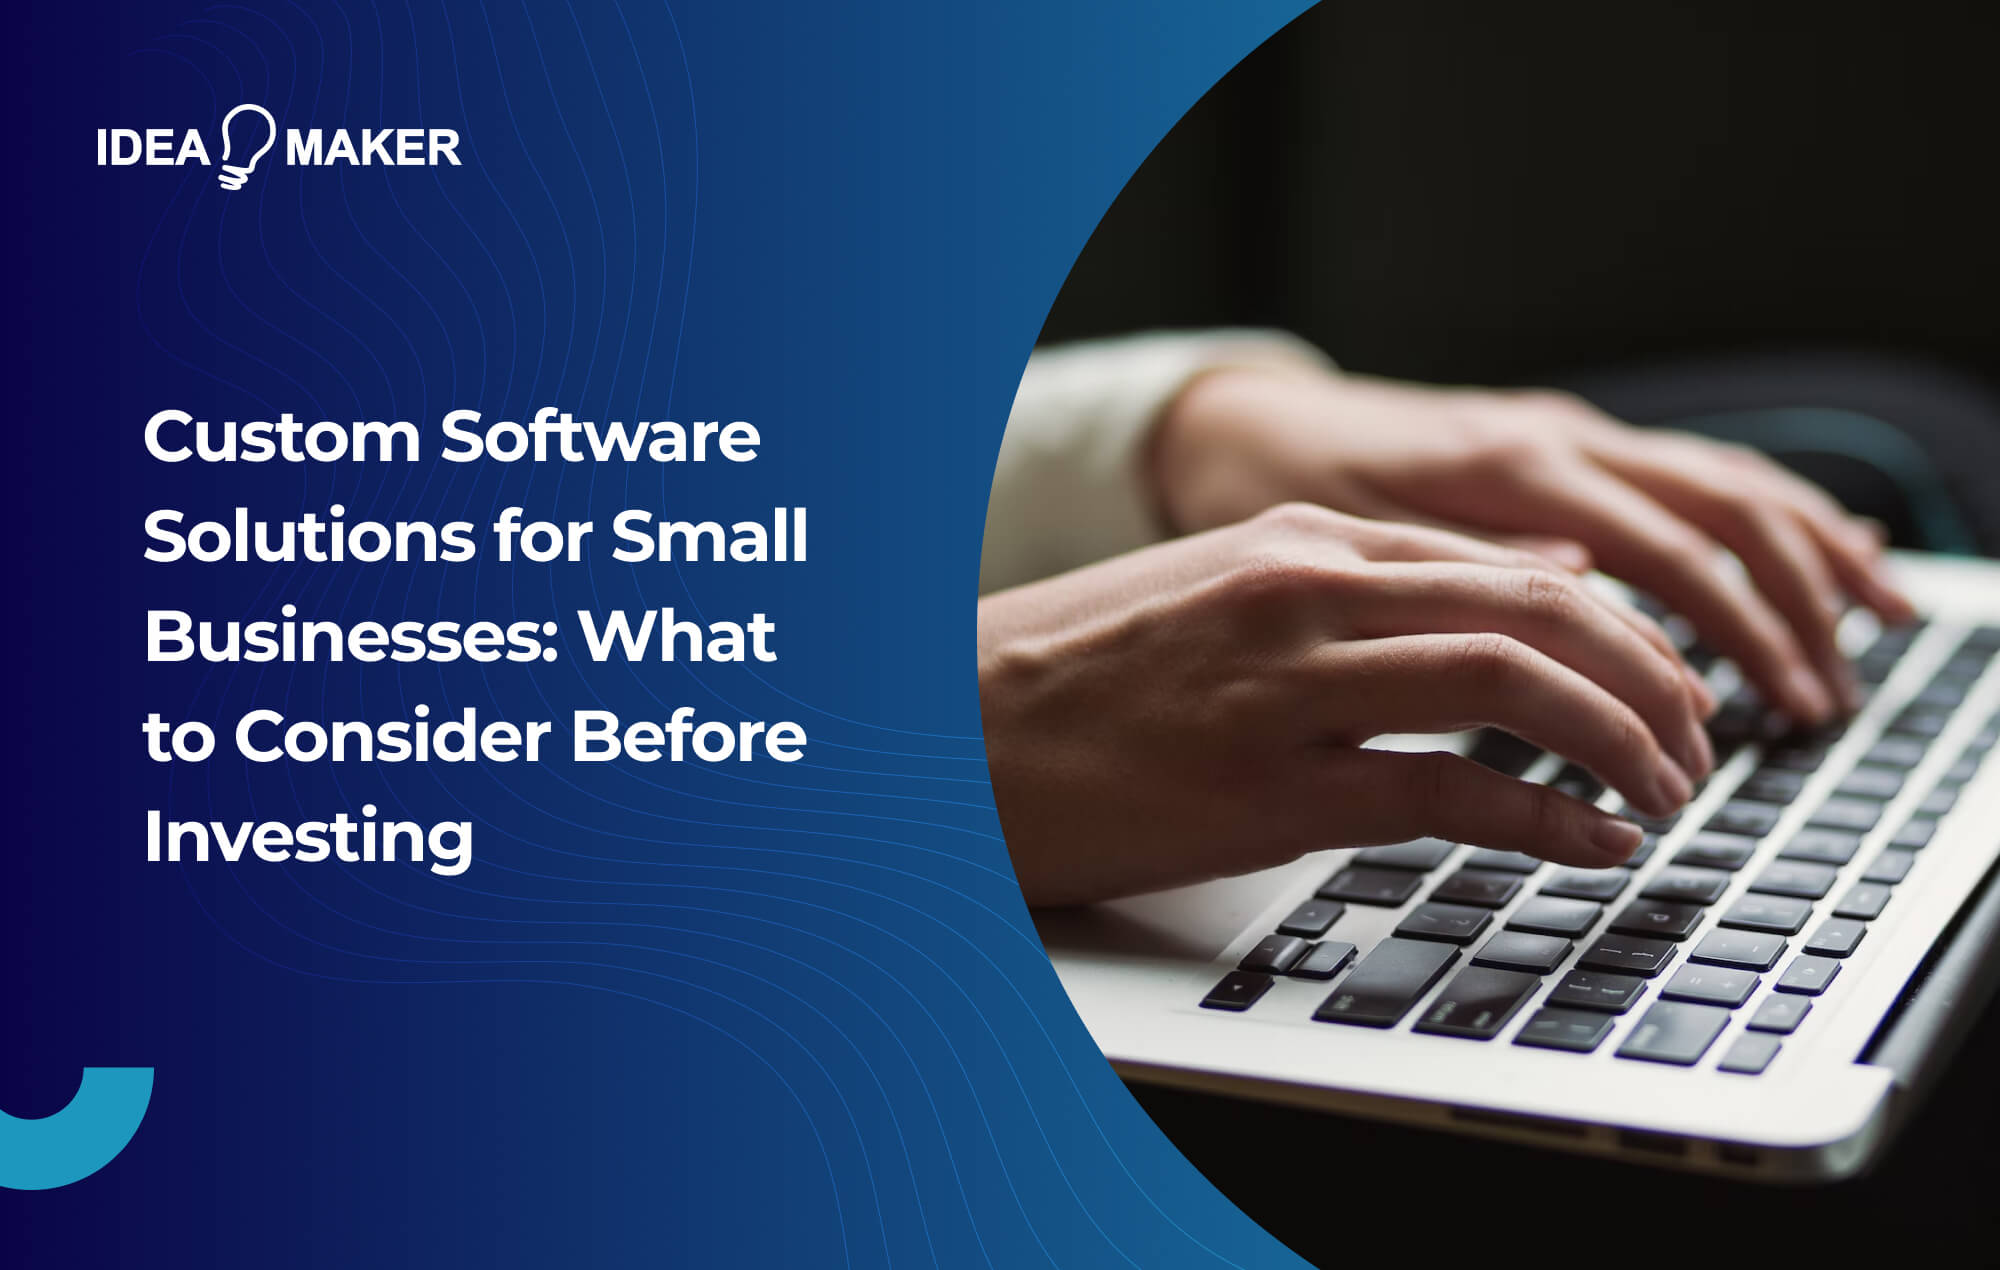 Ideamaker - Custom Software Solutions for Small Businesses_ What to Consider Before Investing